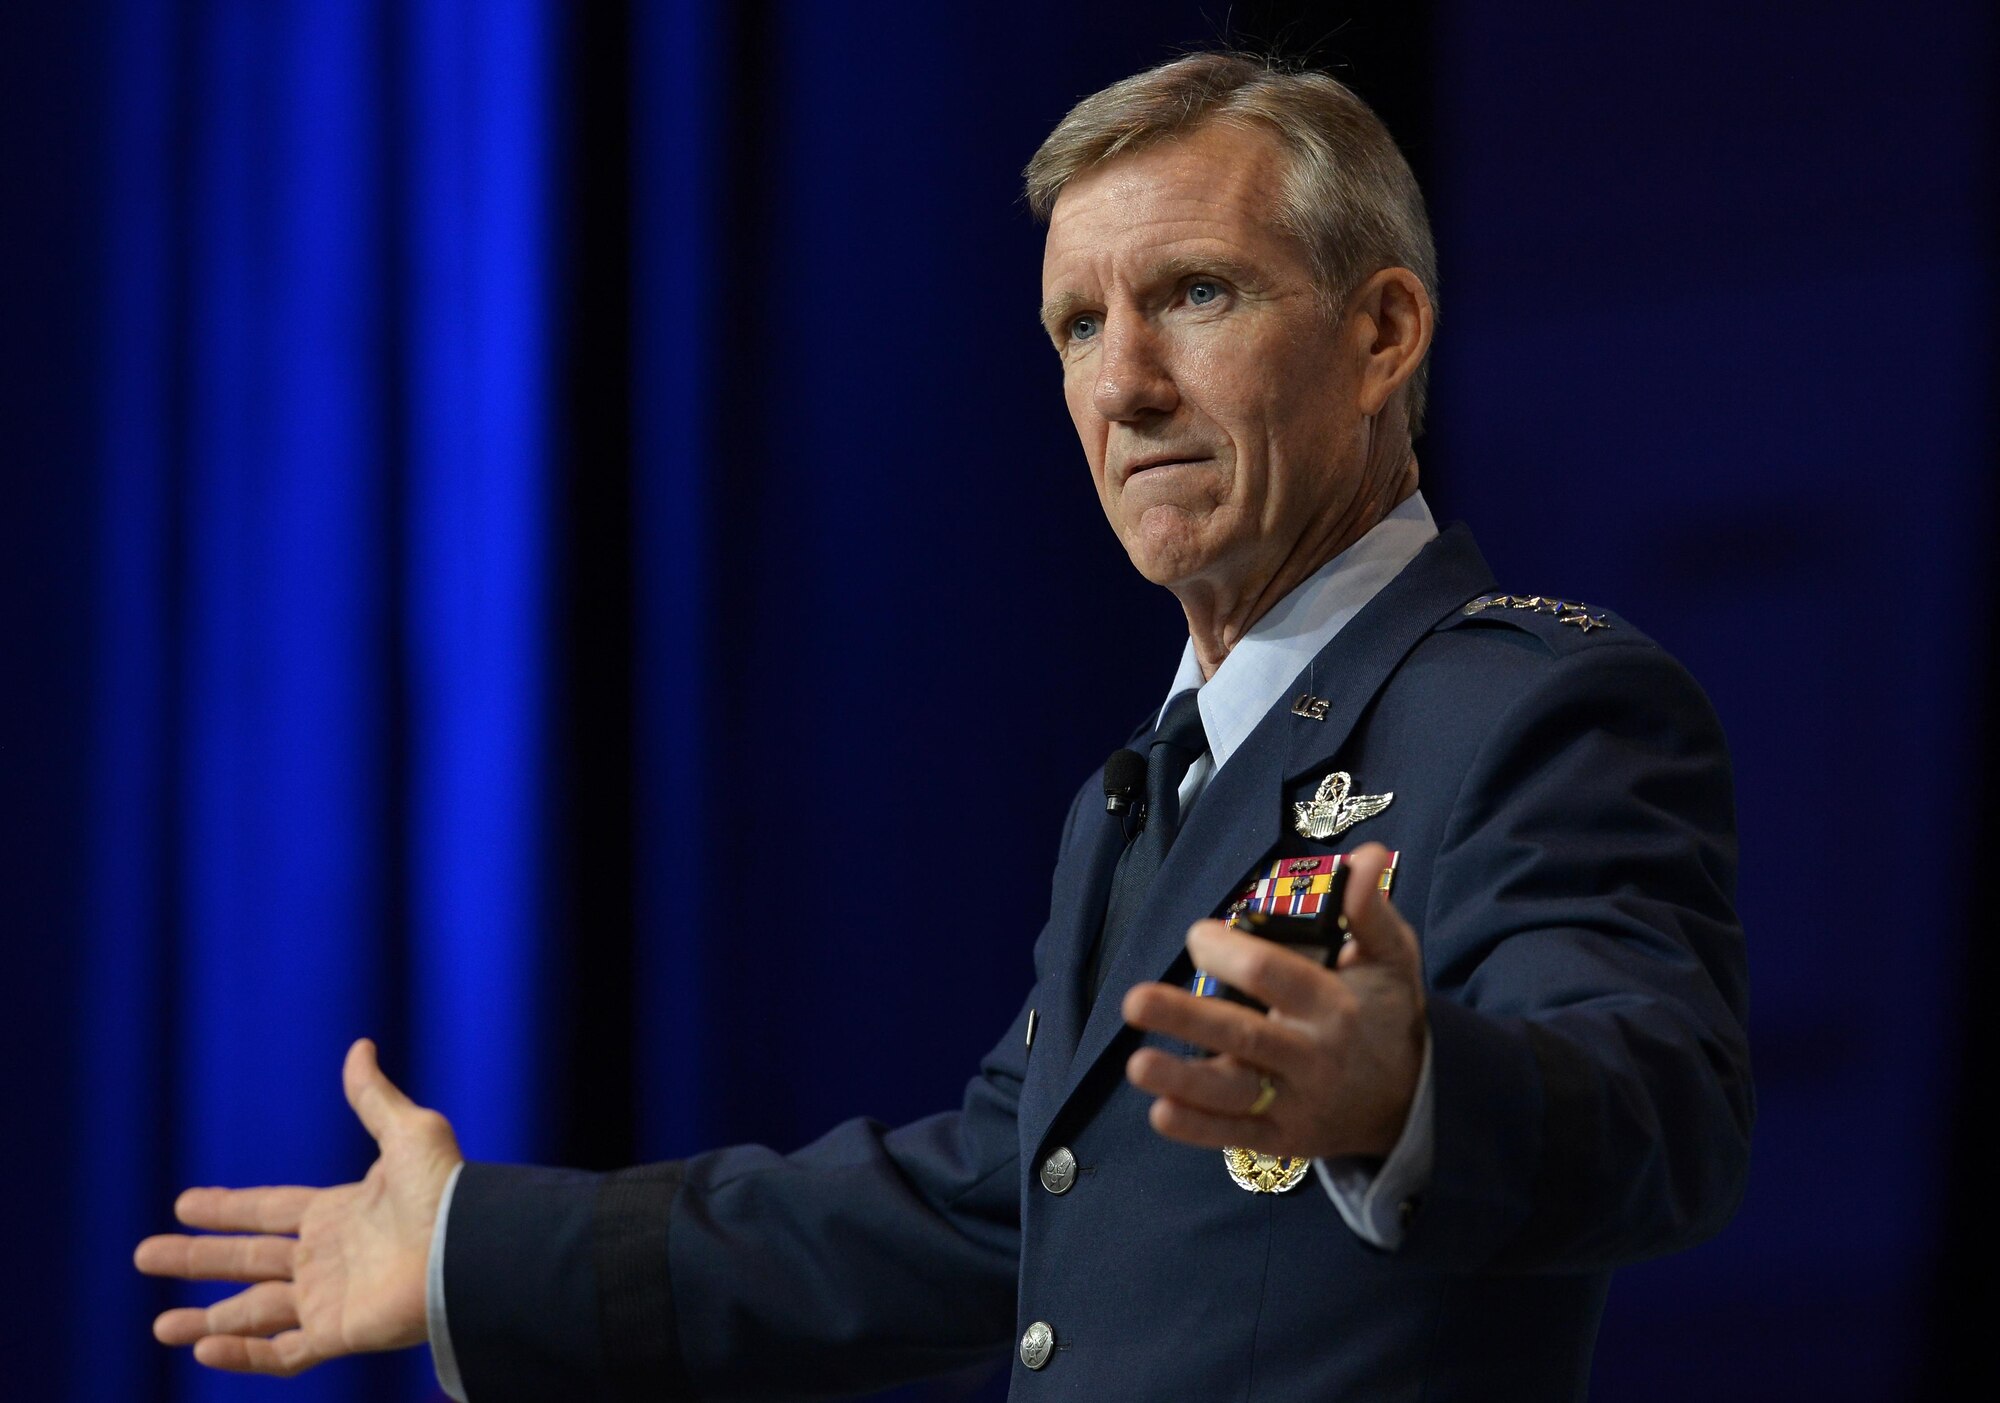 Gen. Hawk Carlisle, the Air Combat Command commander, speaks during Air Force Association's Air, Space and Cyber Conference in National Harbor, Md., Sept. 20, 2016. ACC operates more than 1,300 aircraft, 34 wings, 19 bases, and more than 70 operating locations worldwide with 94,000 active-duty and civilian personnel. (U.S. Air Force photo/Staff Sgt. Whitney Stanfield)
